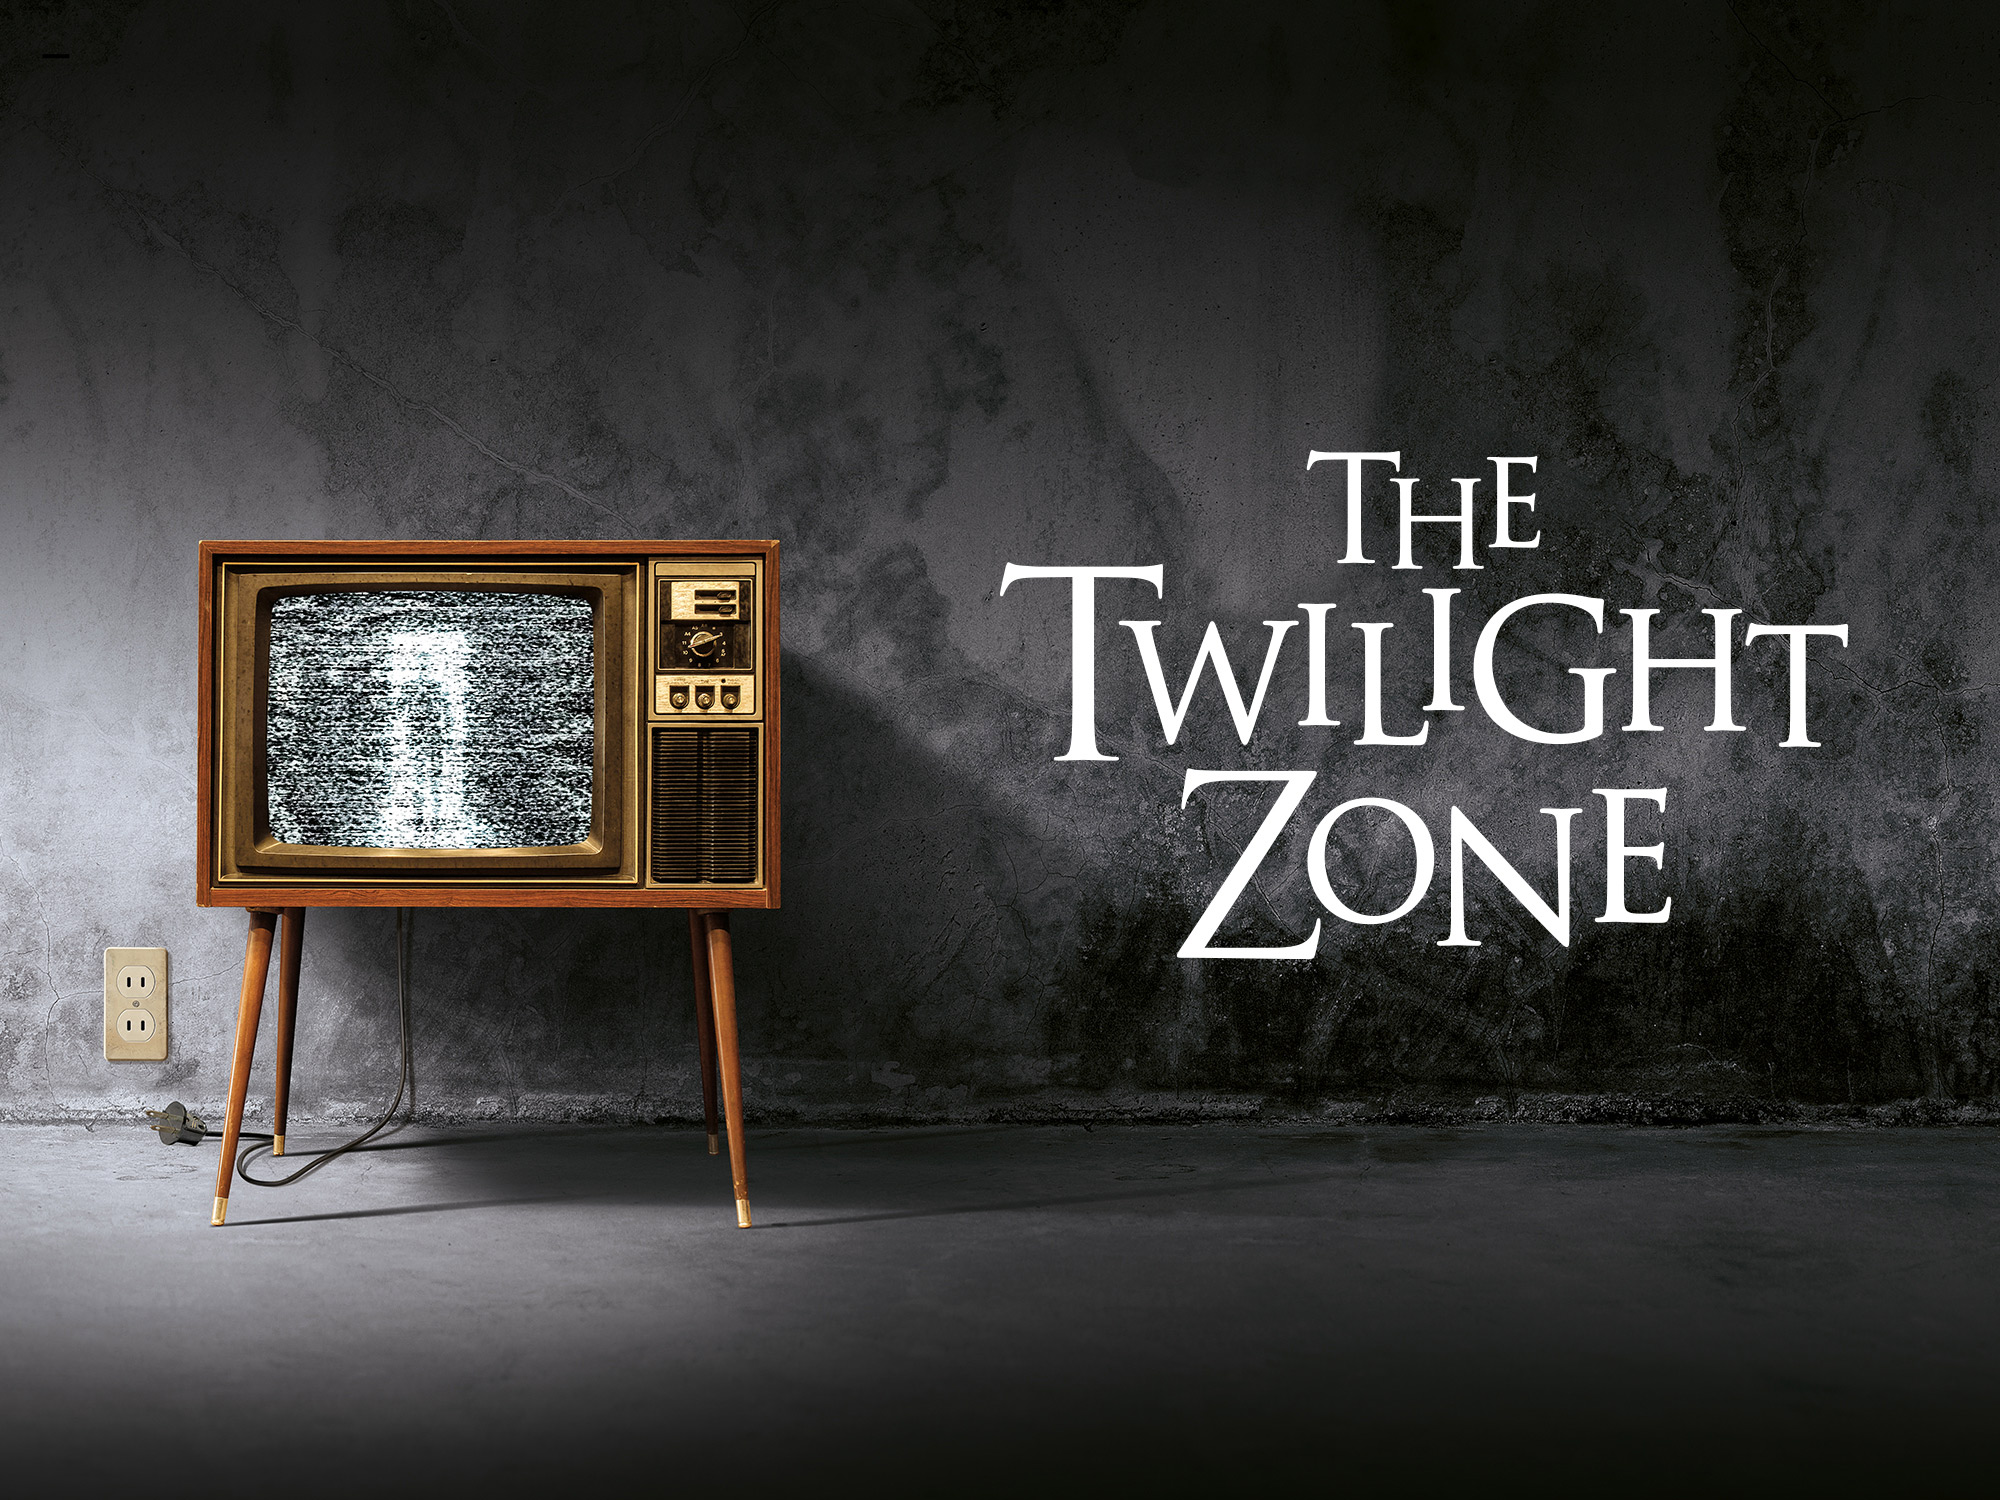 The dimension of imagination: The Twilight Zone on stage at The